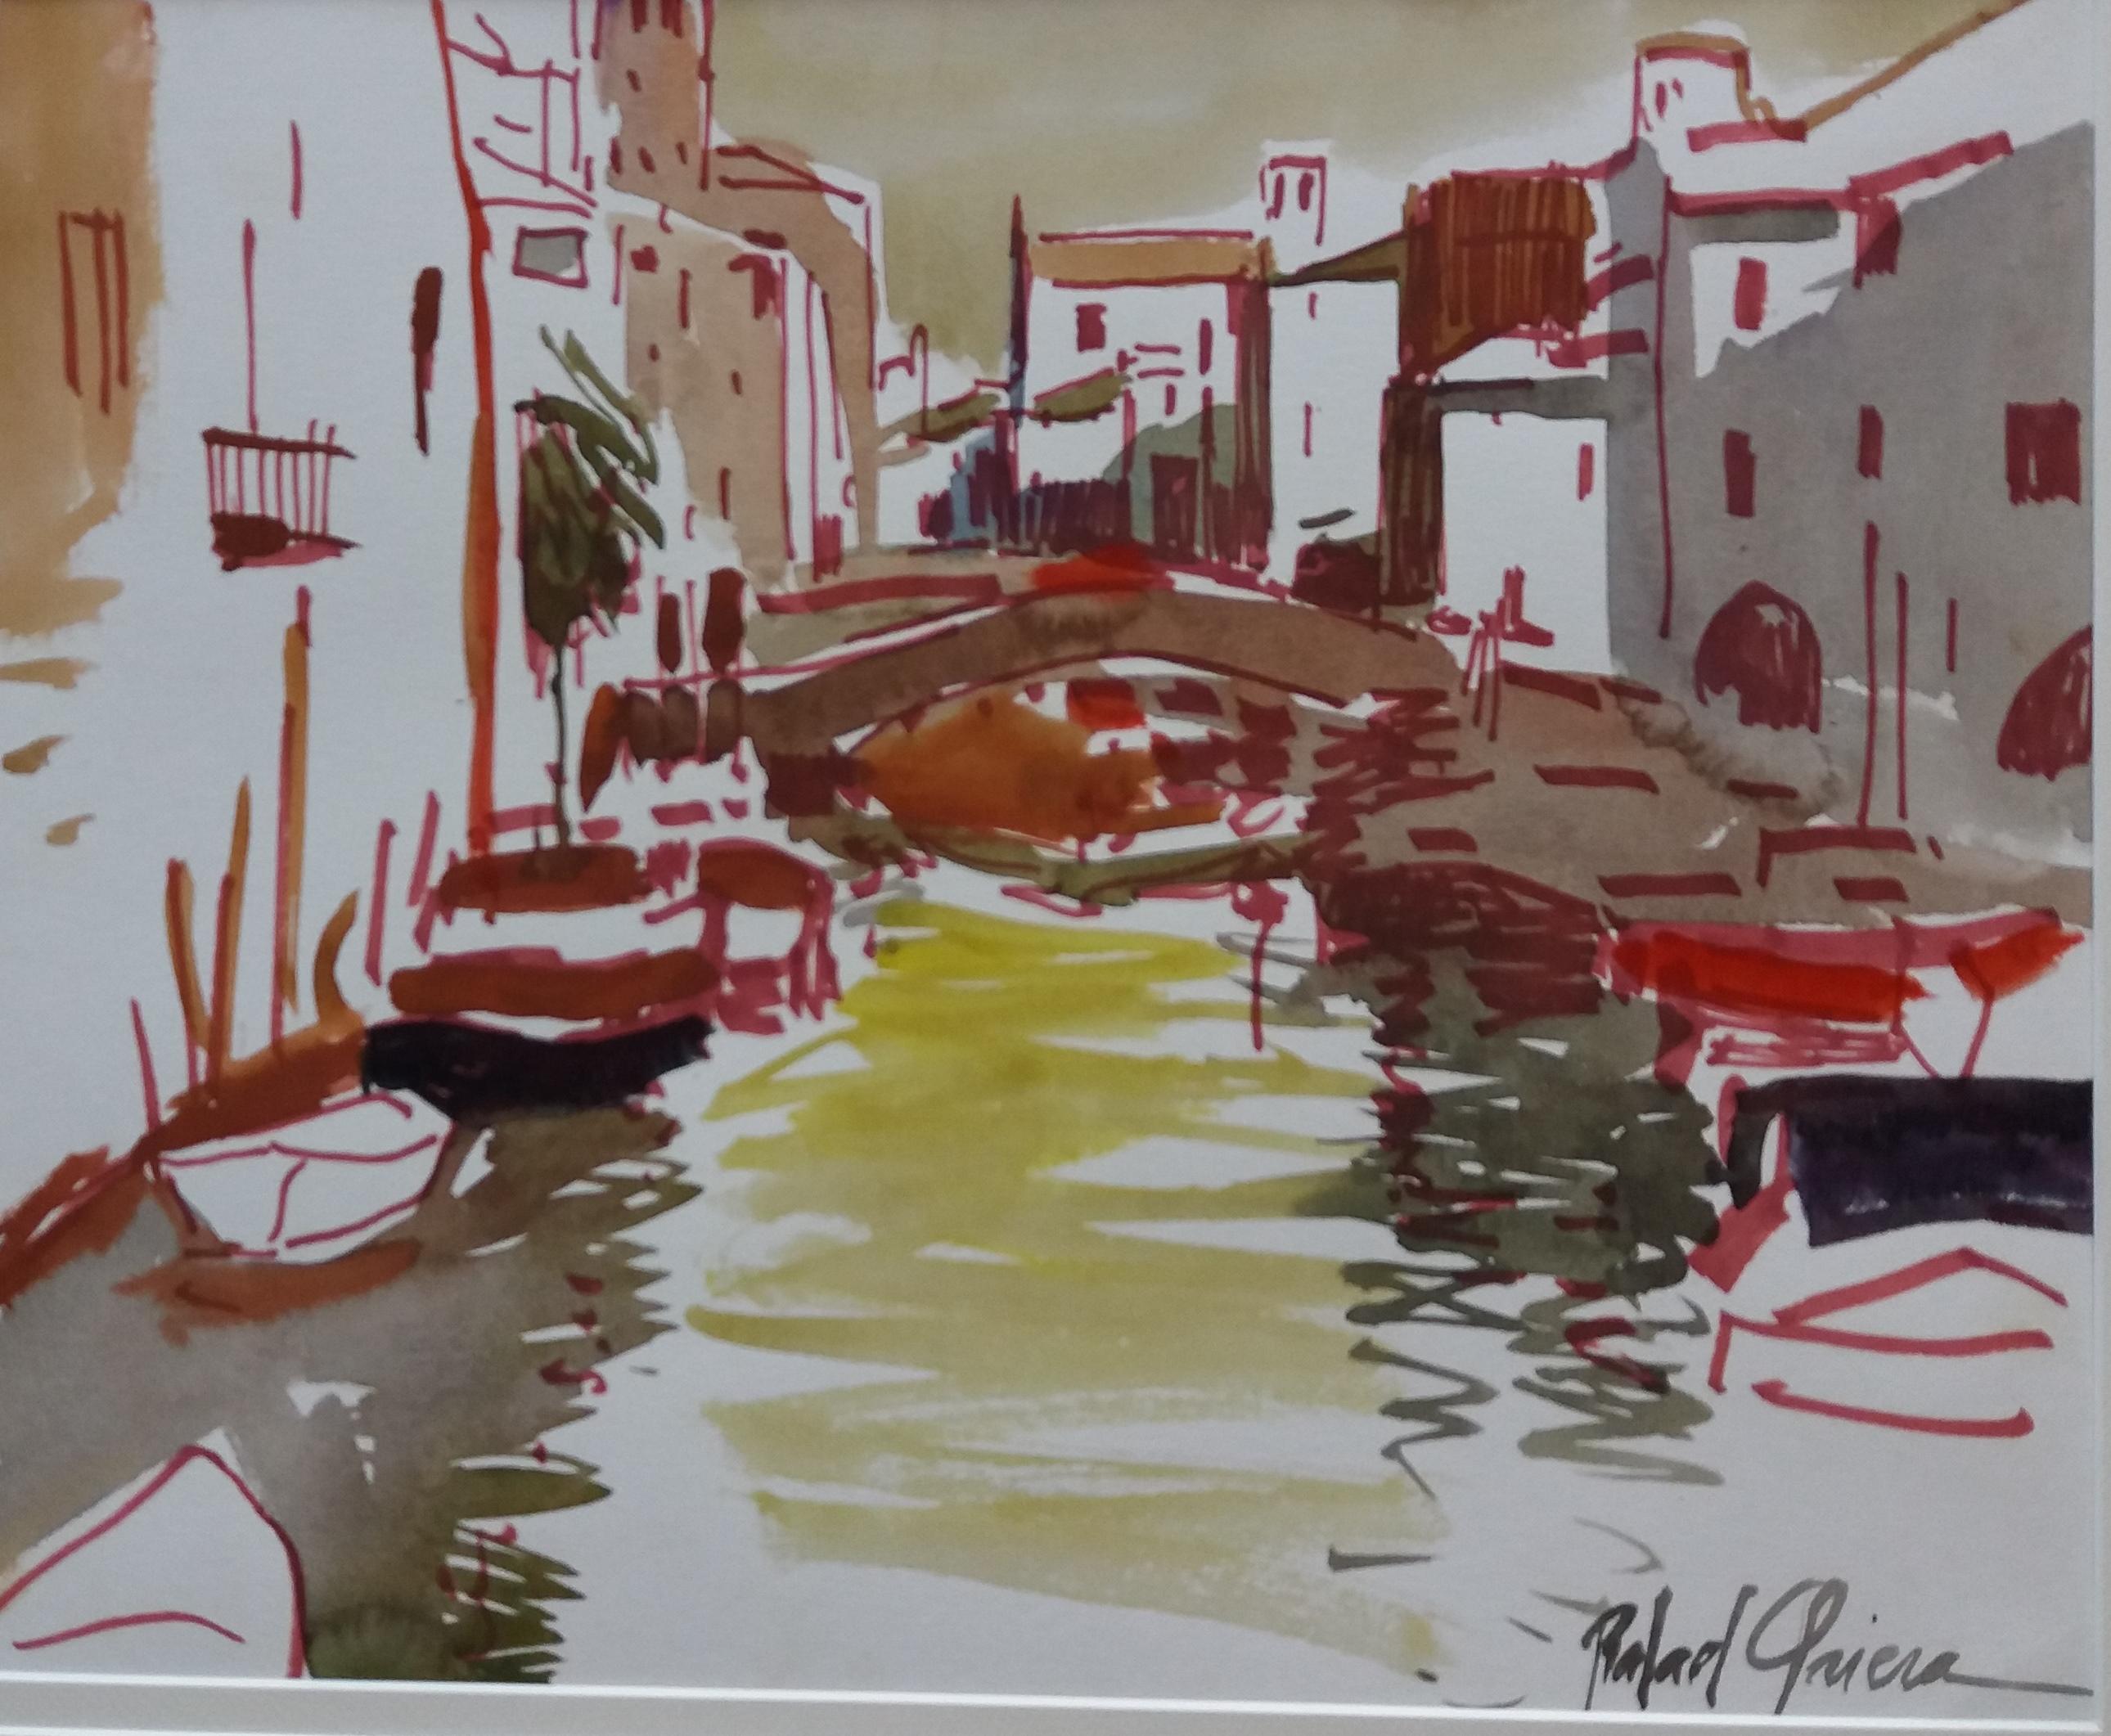 Rafael Riera    Venice original watercolor expressionist painting - Painting by RAFAEL GRIERA